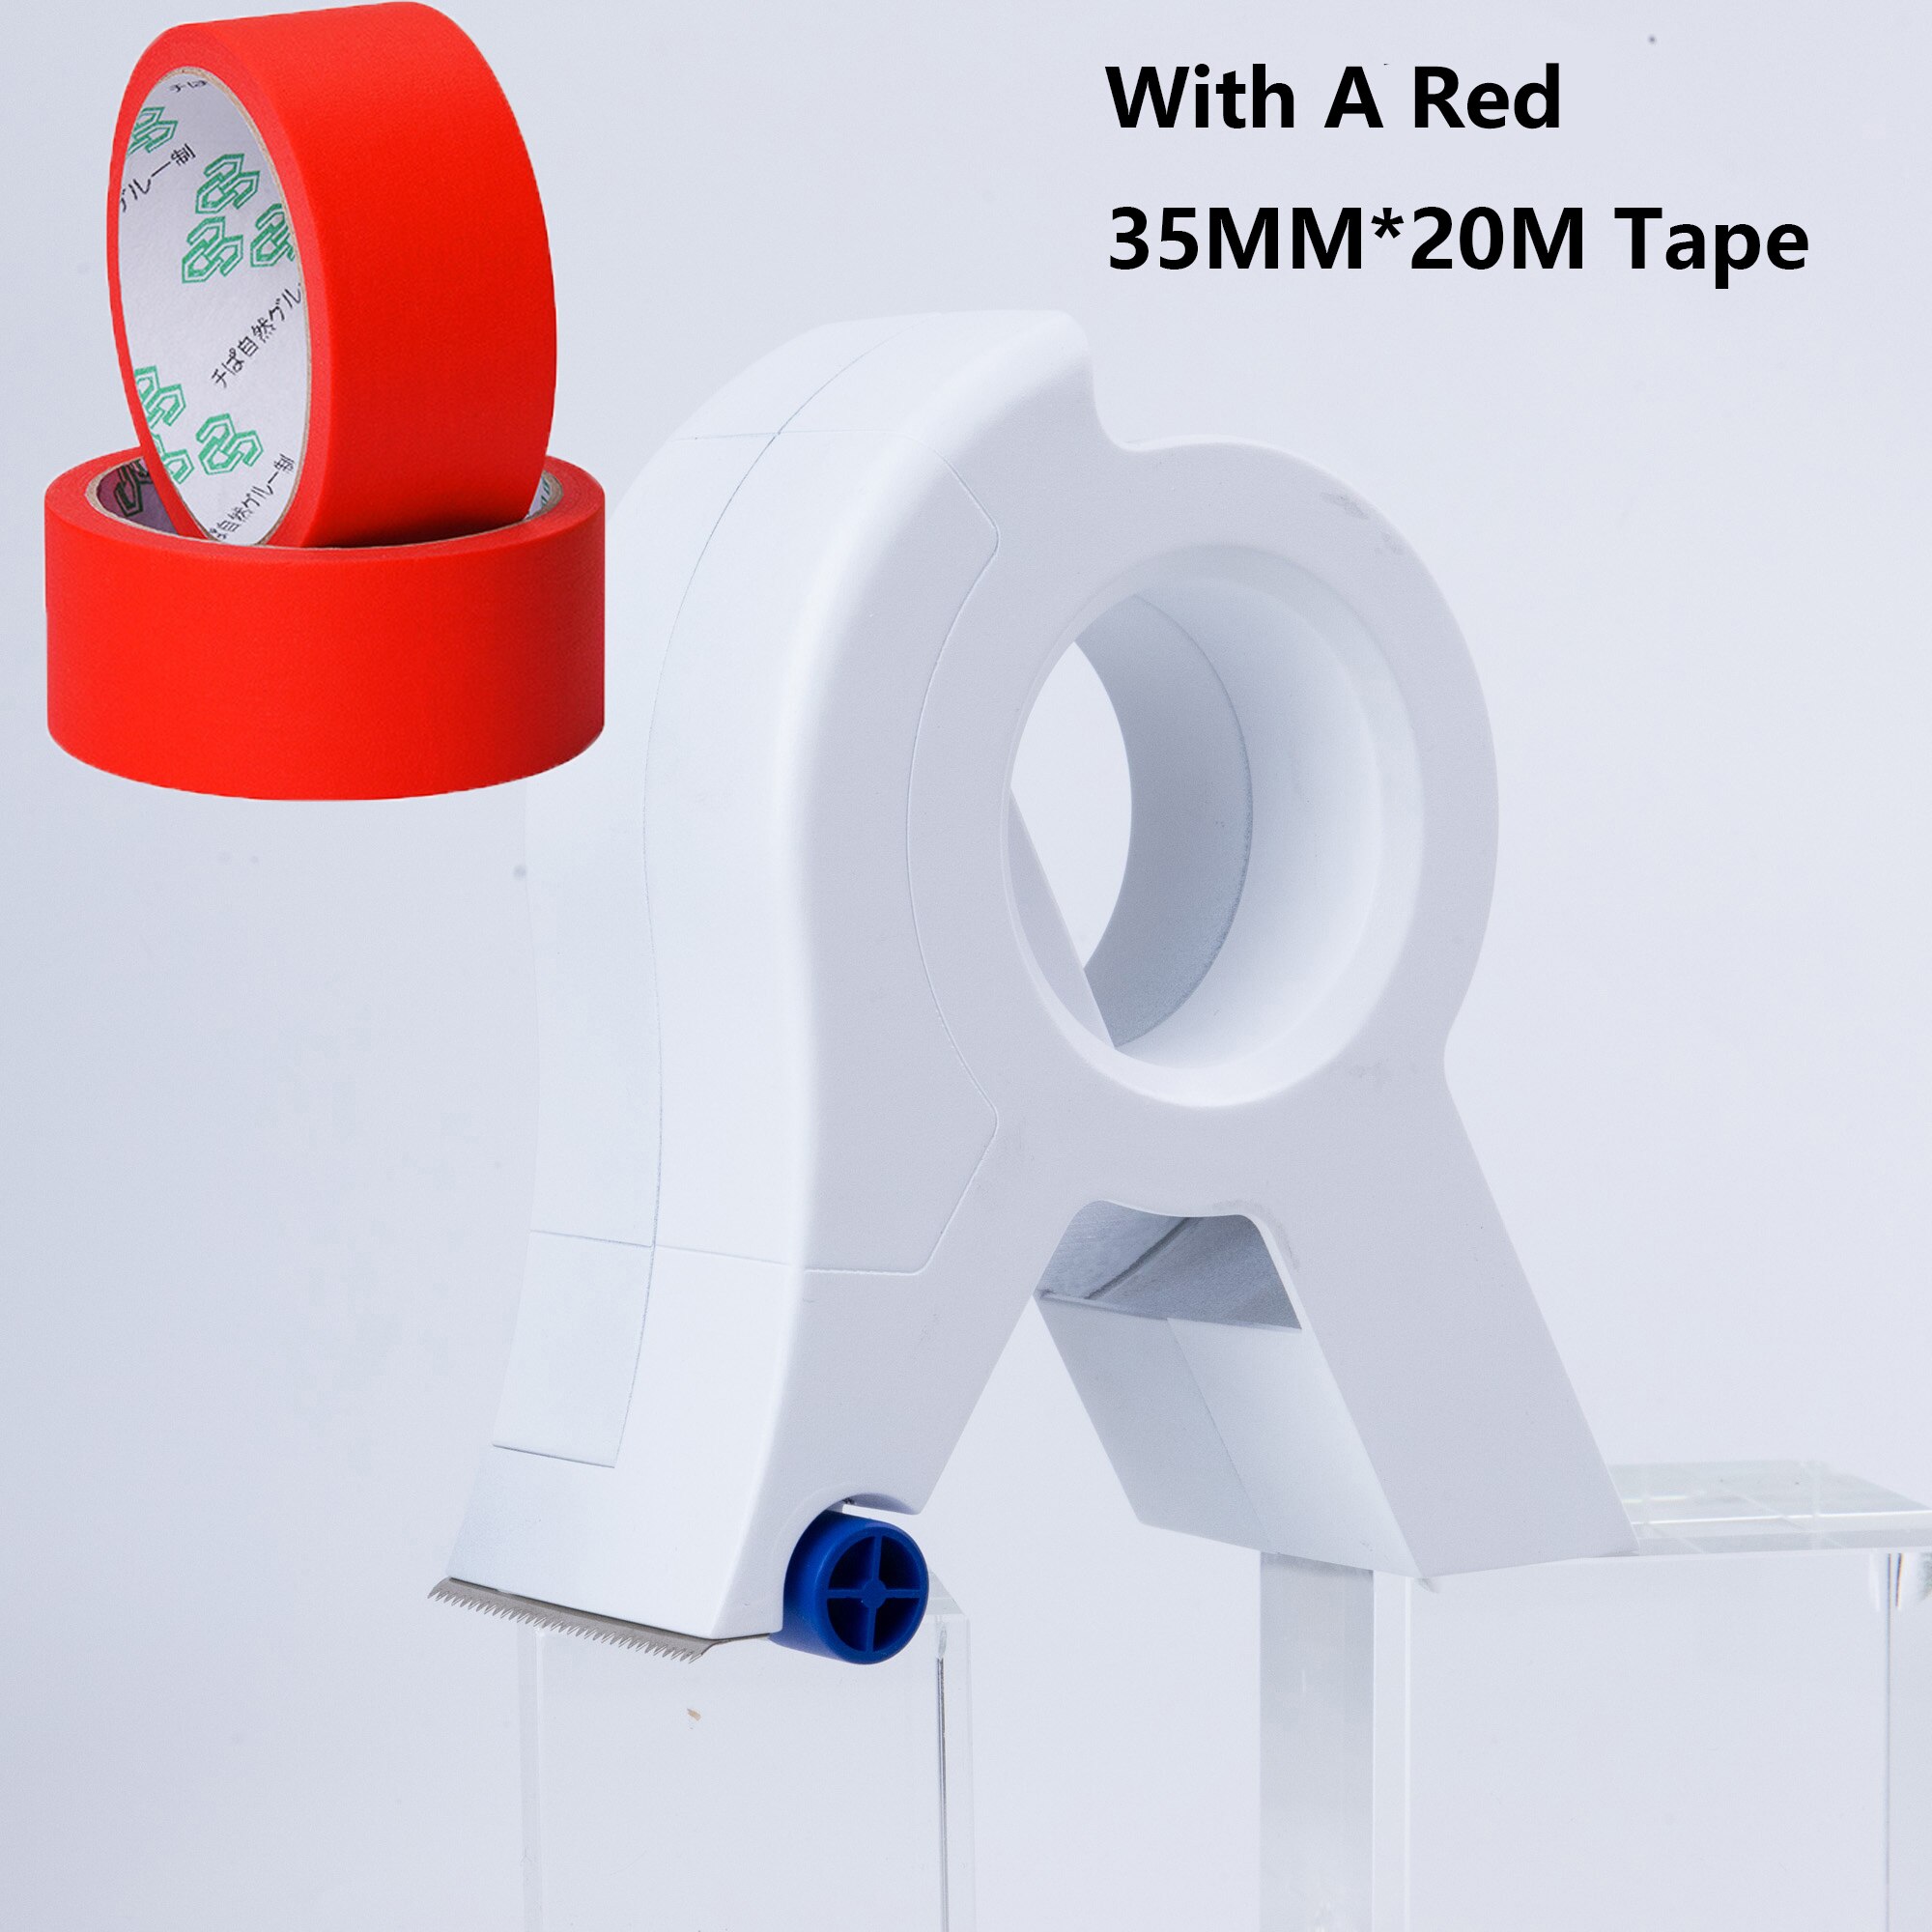 Painter Masking Tape Applicator Dispenser Machine Wall Floor Painting Packaging Sealing Pack Tape Tool Fit Tape 50mm Wide Max.: With A Red Tape